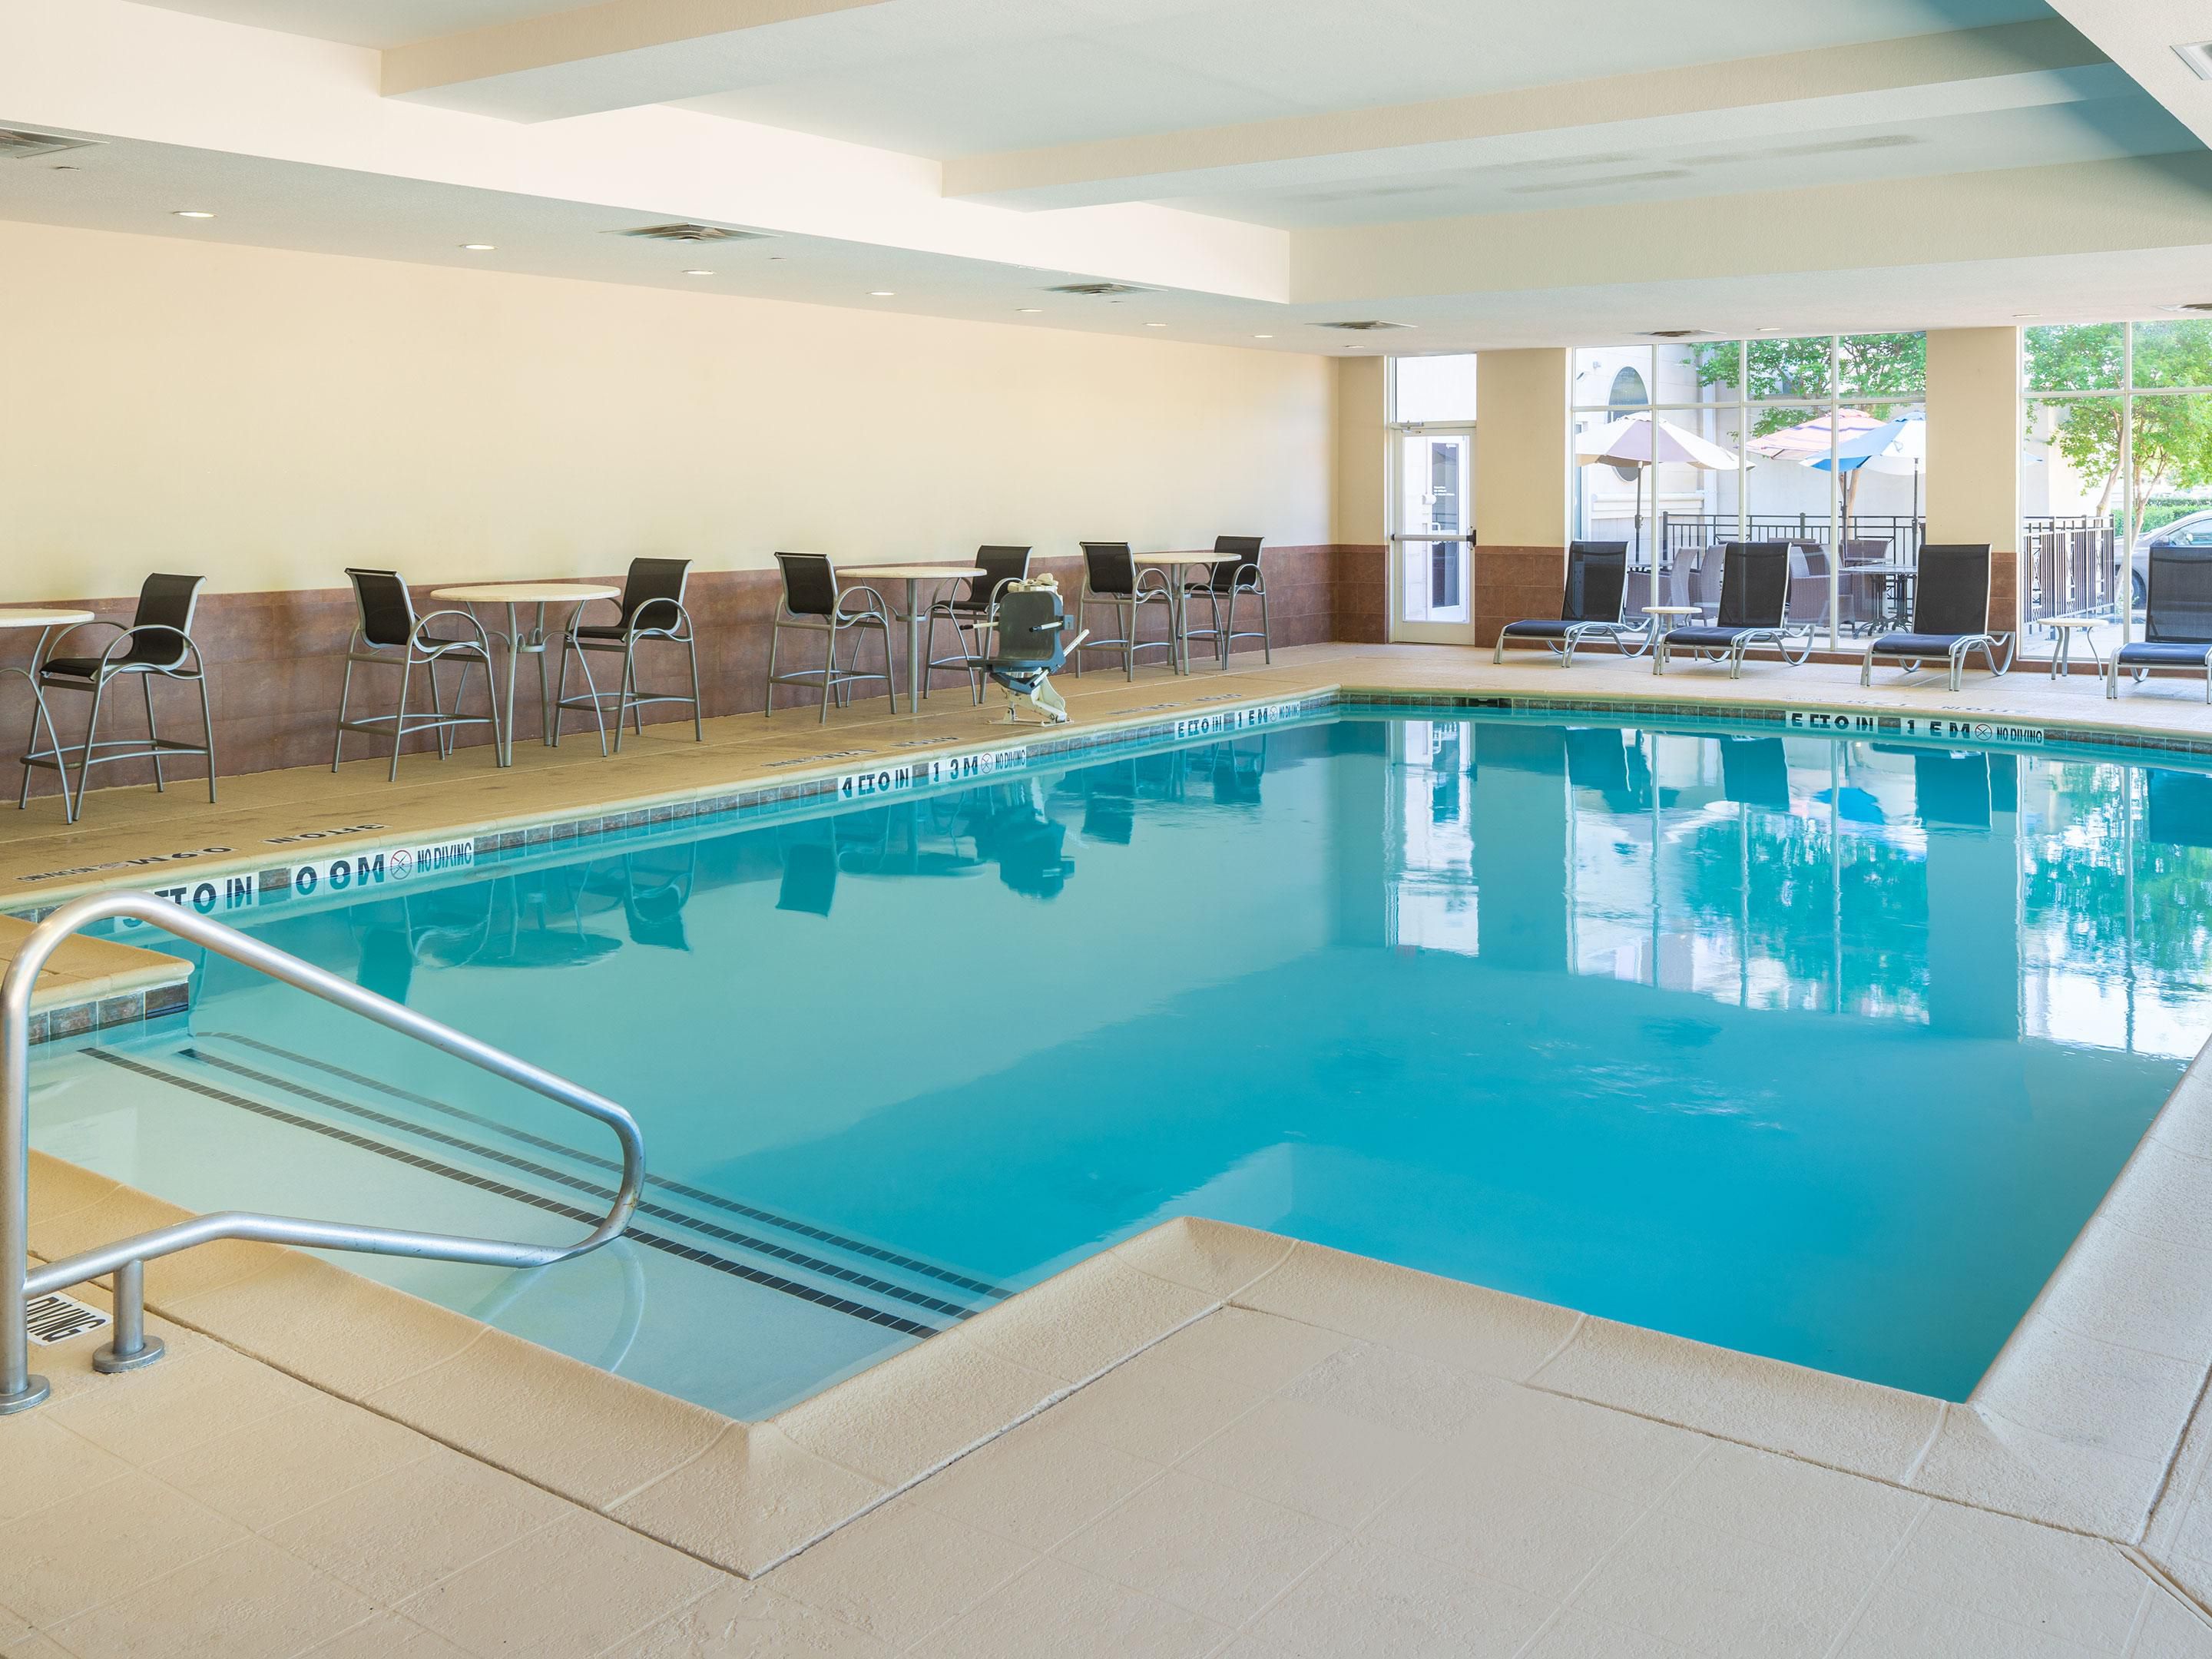 Regardless of the season, it is always the perfect season to relax in our indoor pool. Guests of our hotel may enjoy these amenities daily from 8:00 AM to 10:00 PM.